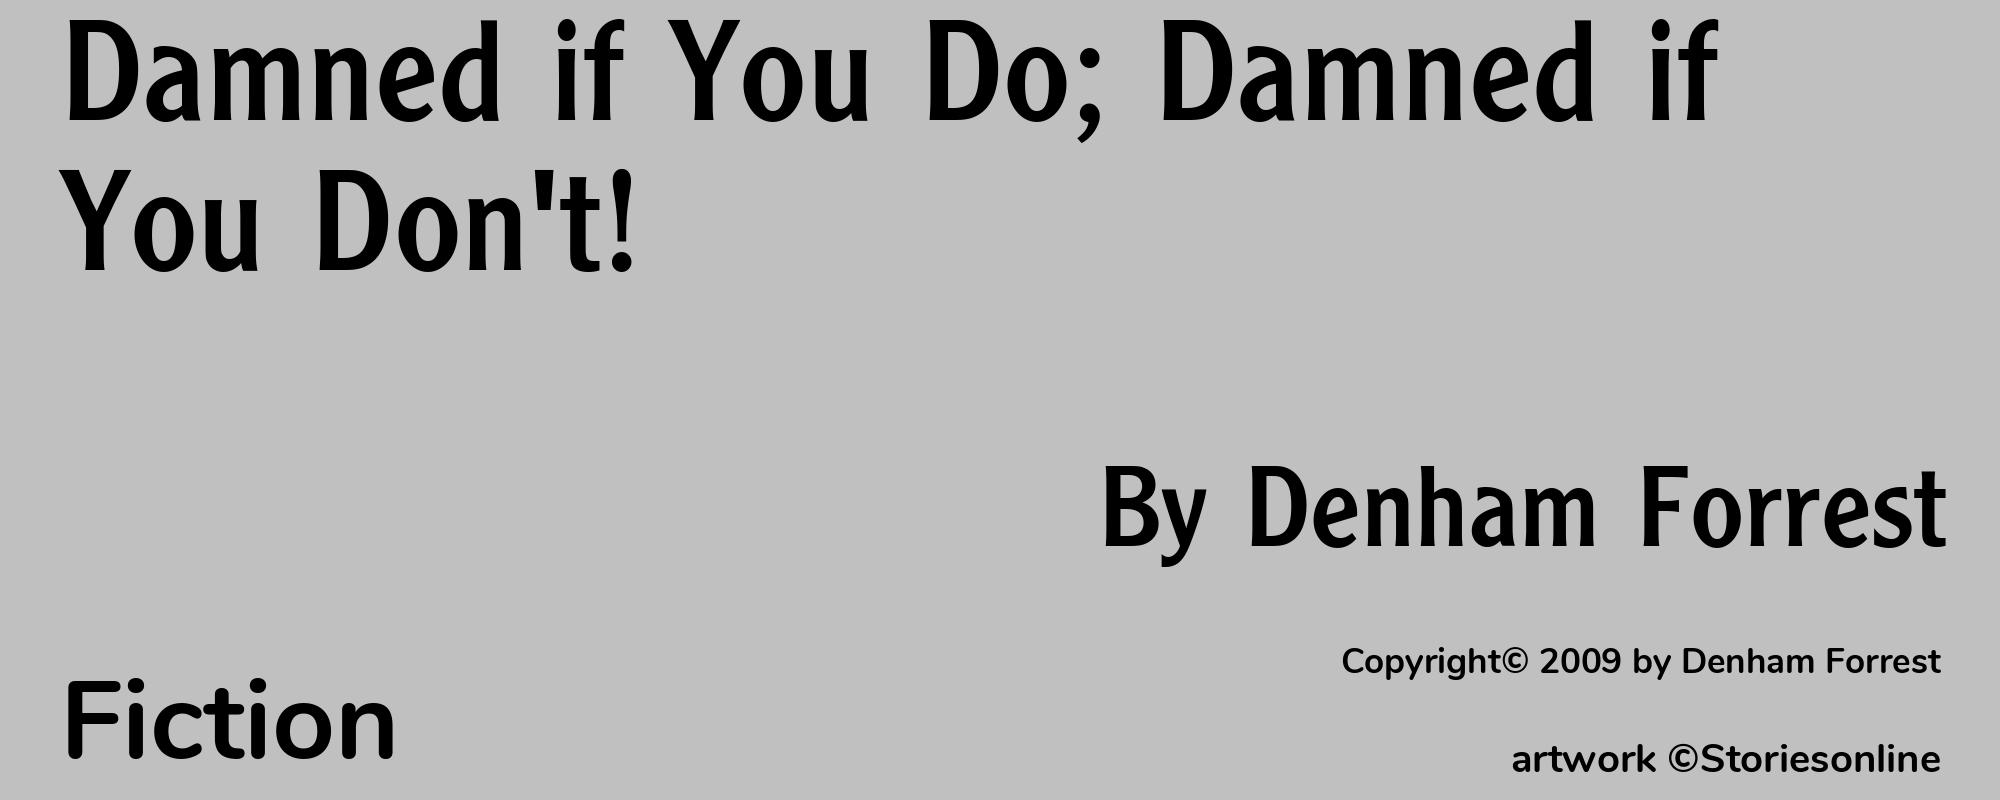 Damned if You Do; Damned if You Don't! - Cover